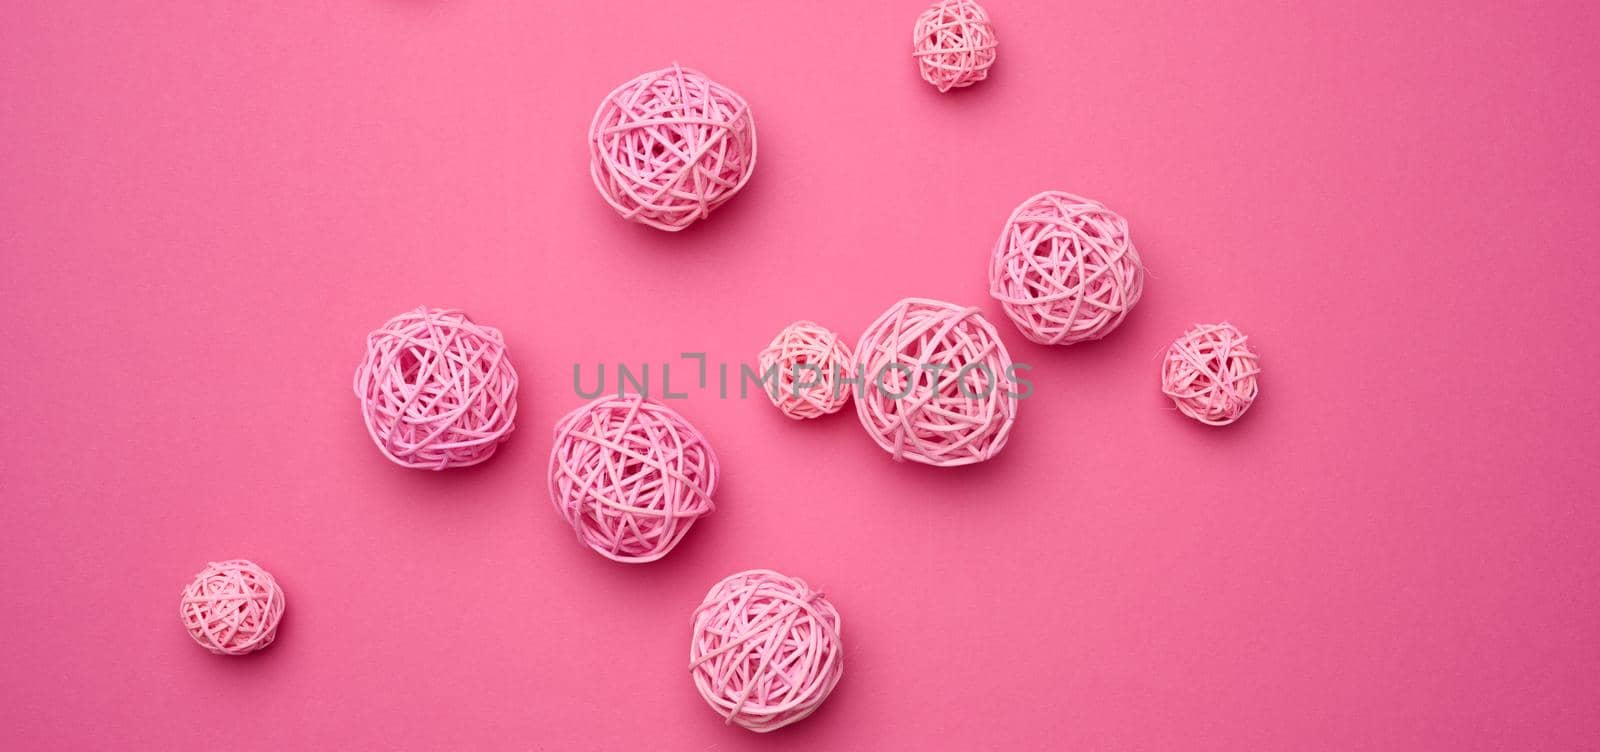 wicker wooden balls on a pink background. Decor. Abstract backdrop, top view